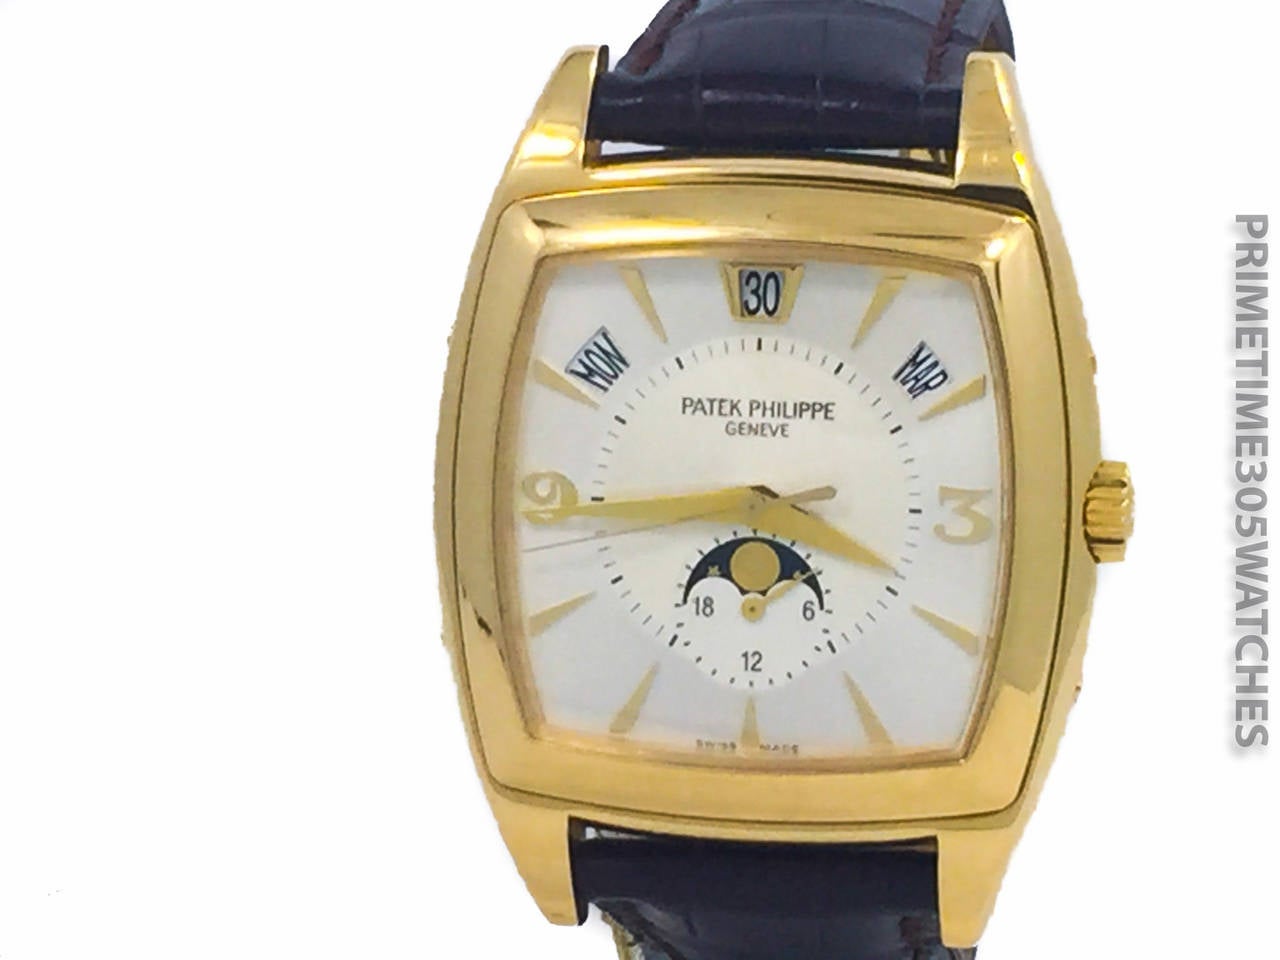 Mens Patek Philippe Gondolo Annual Calendar in 18k Yellow Gold, Ref 5135J. The Watch is in Excellent Condition and all Functions Work Great. Included With the Watch are All its Inner & Outer Box, Stylus Pusher, Manuals & Certificate. The Watch is on